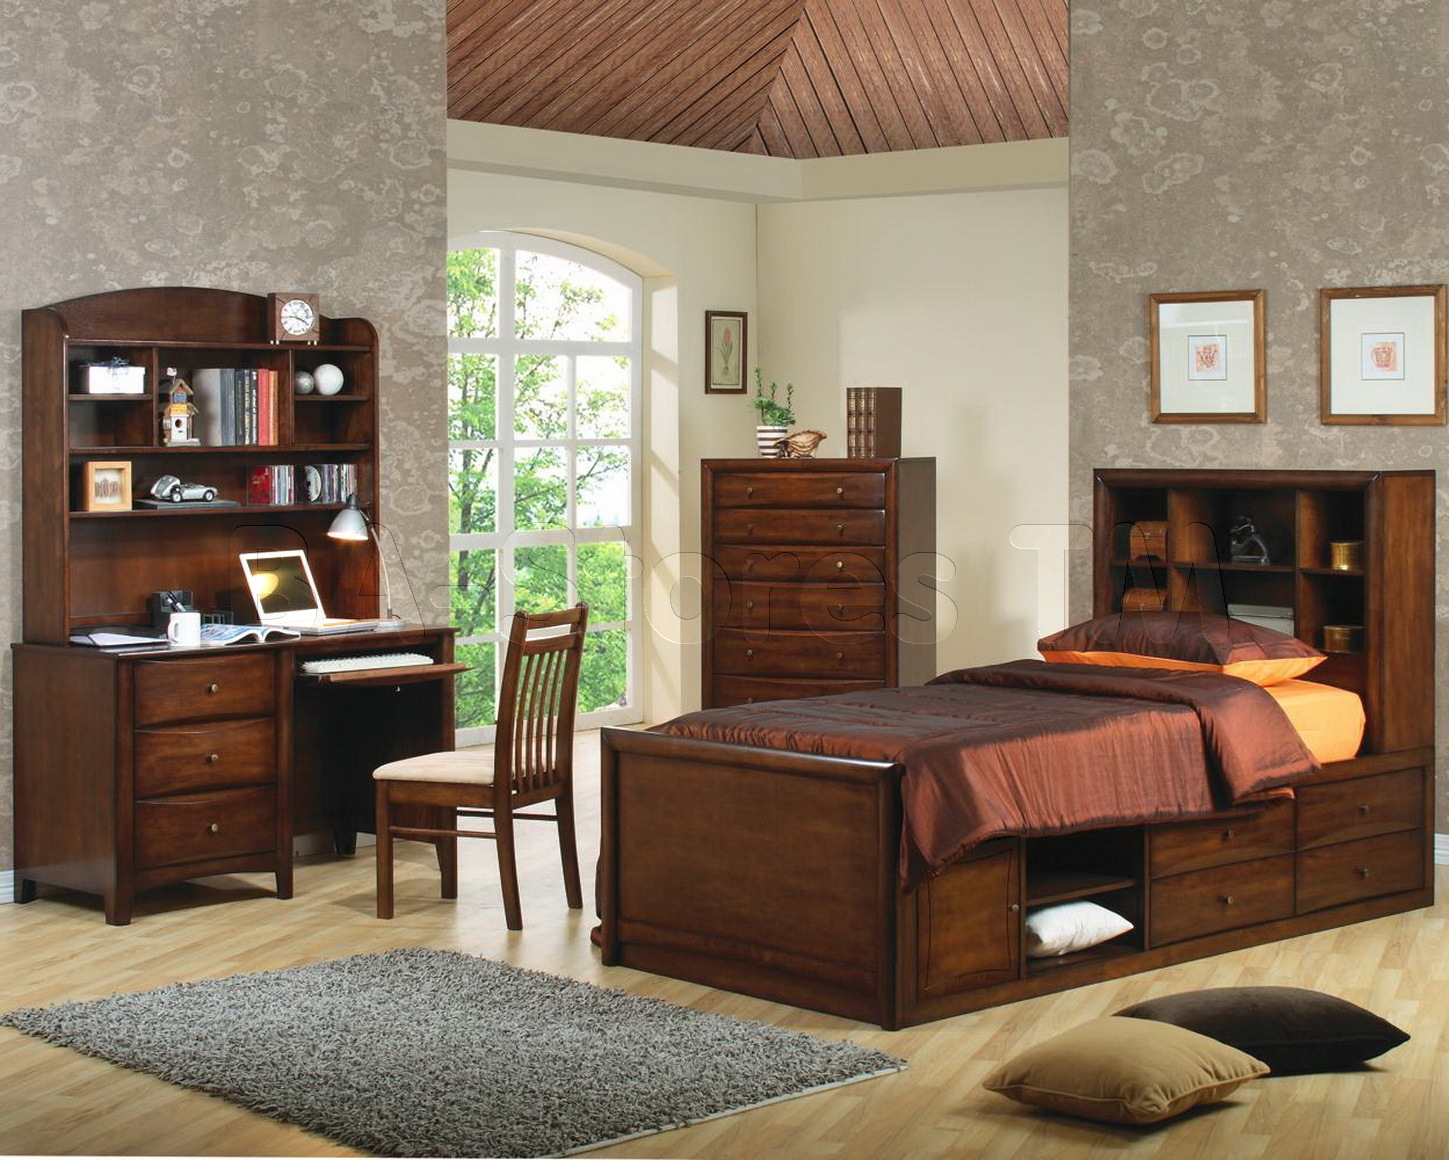 Top 10 Punto Medio Noticias Twin Bed Furniture Sets For Boy pertaining to dimensions 1449 X 1160